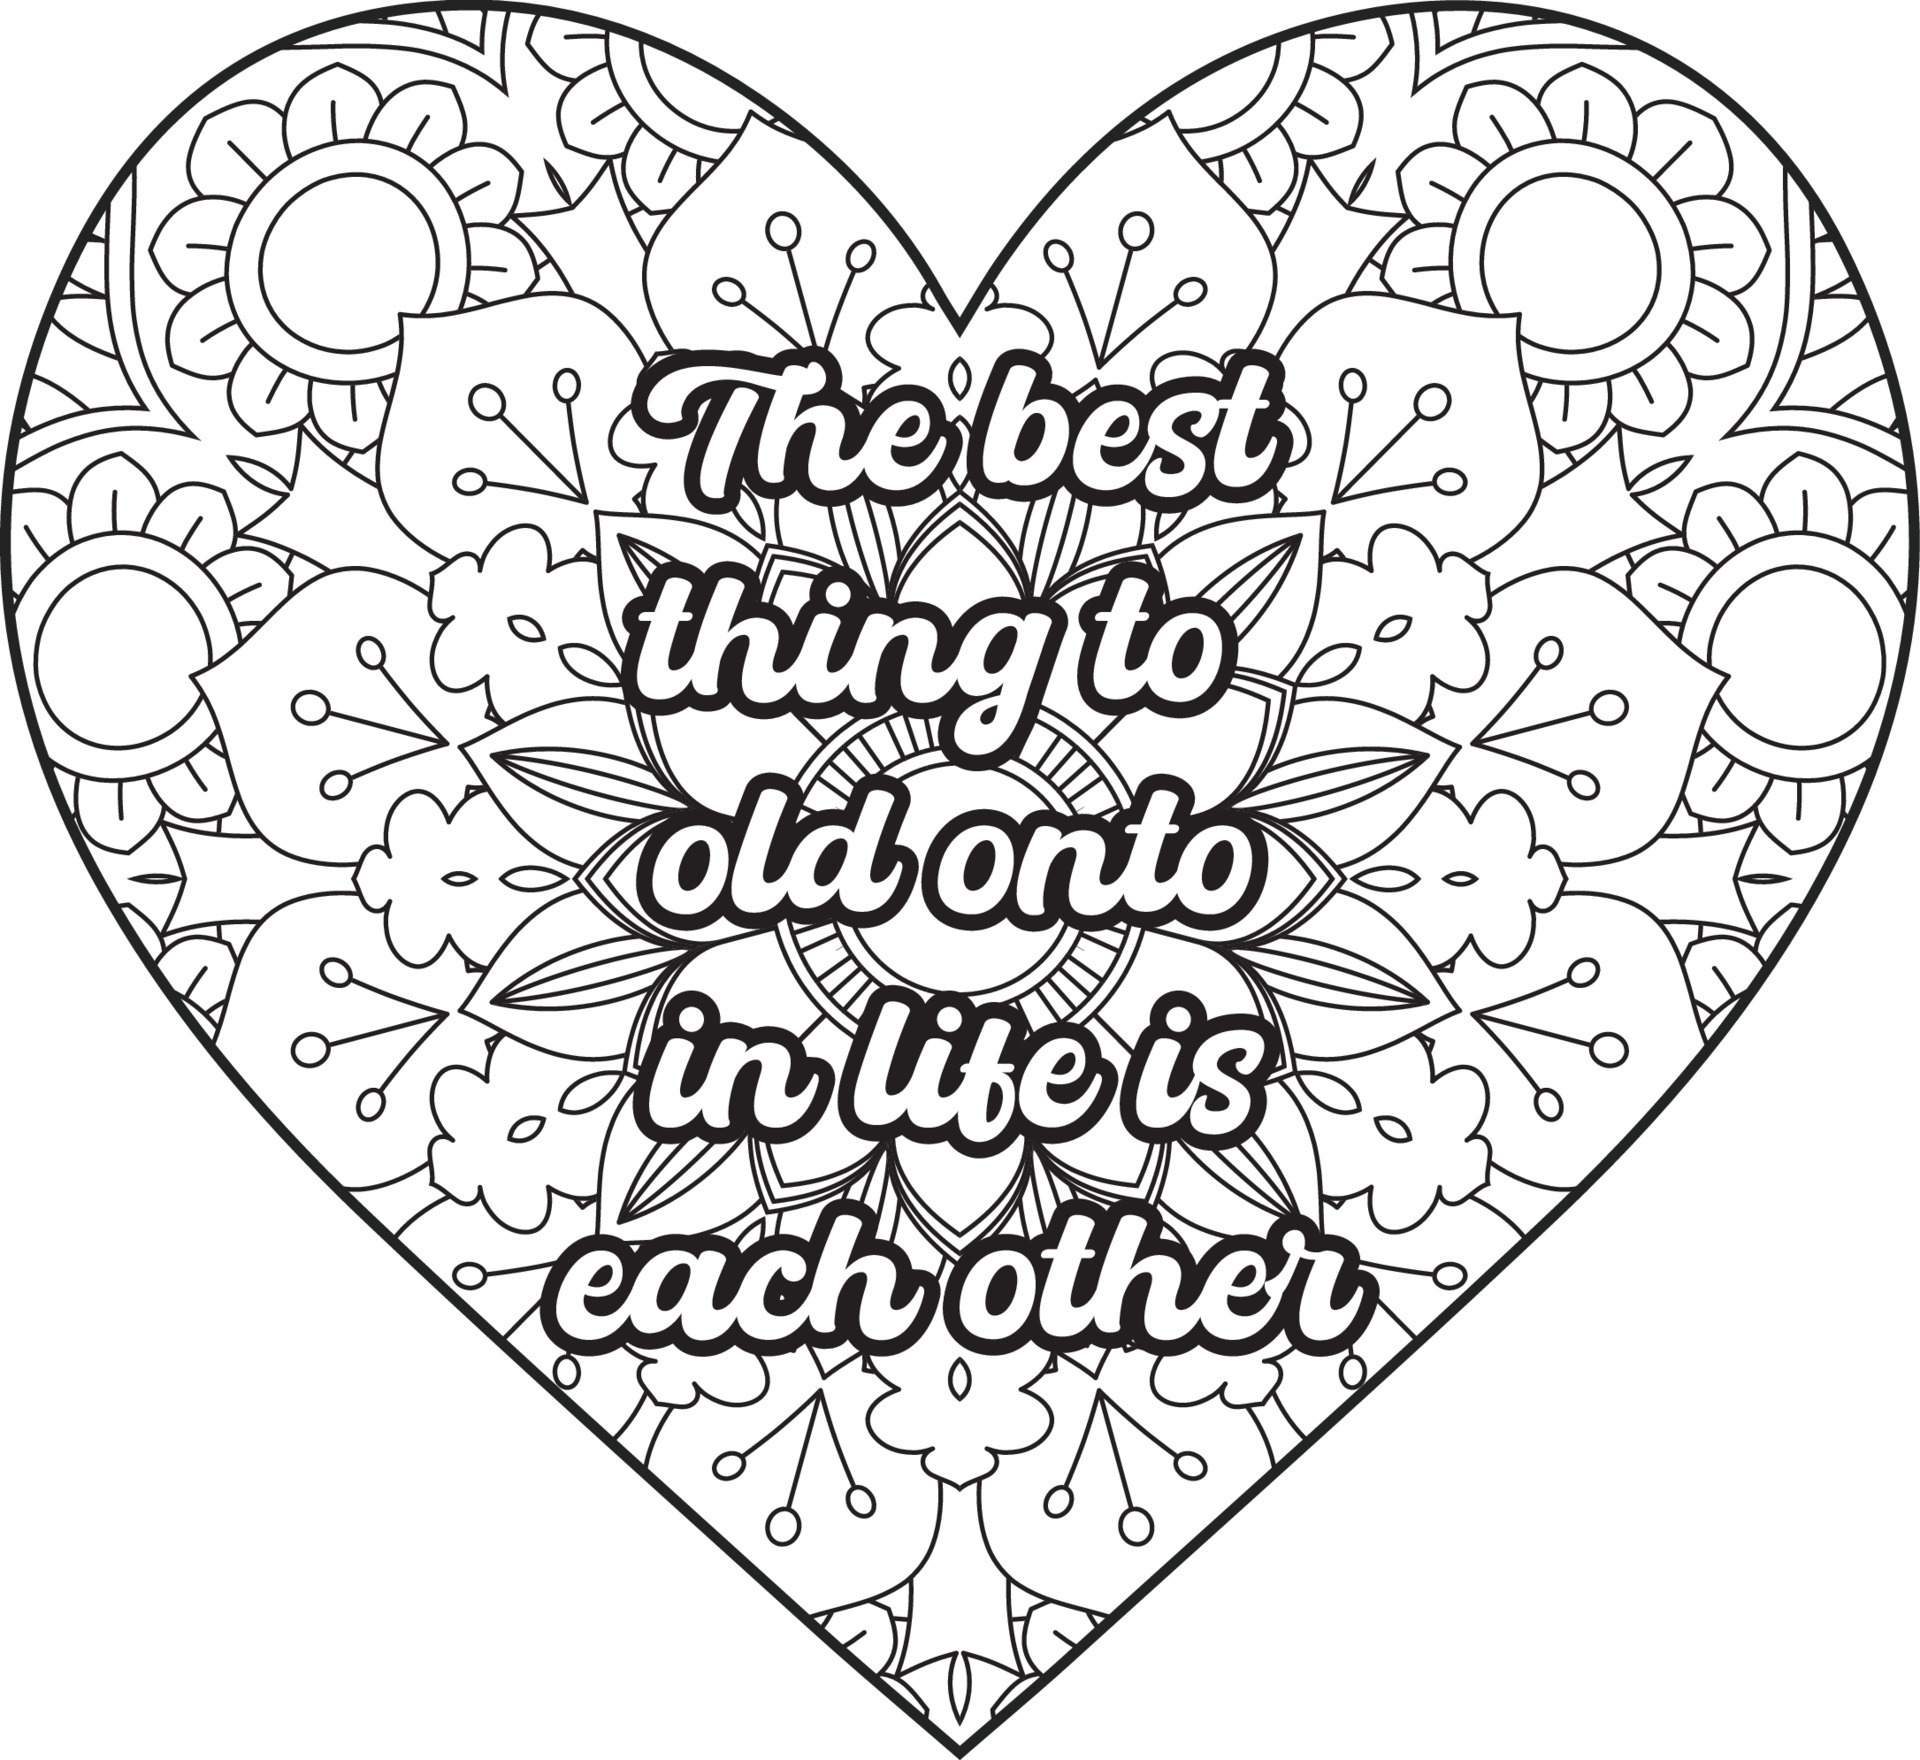 Daily dose of love quotes here - Love Quotes | Love quotes, Sketch book,  Romantic drawing